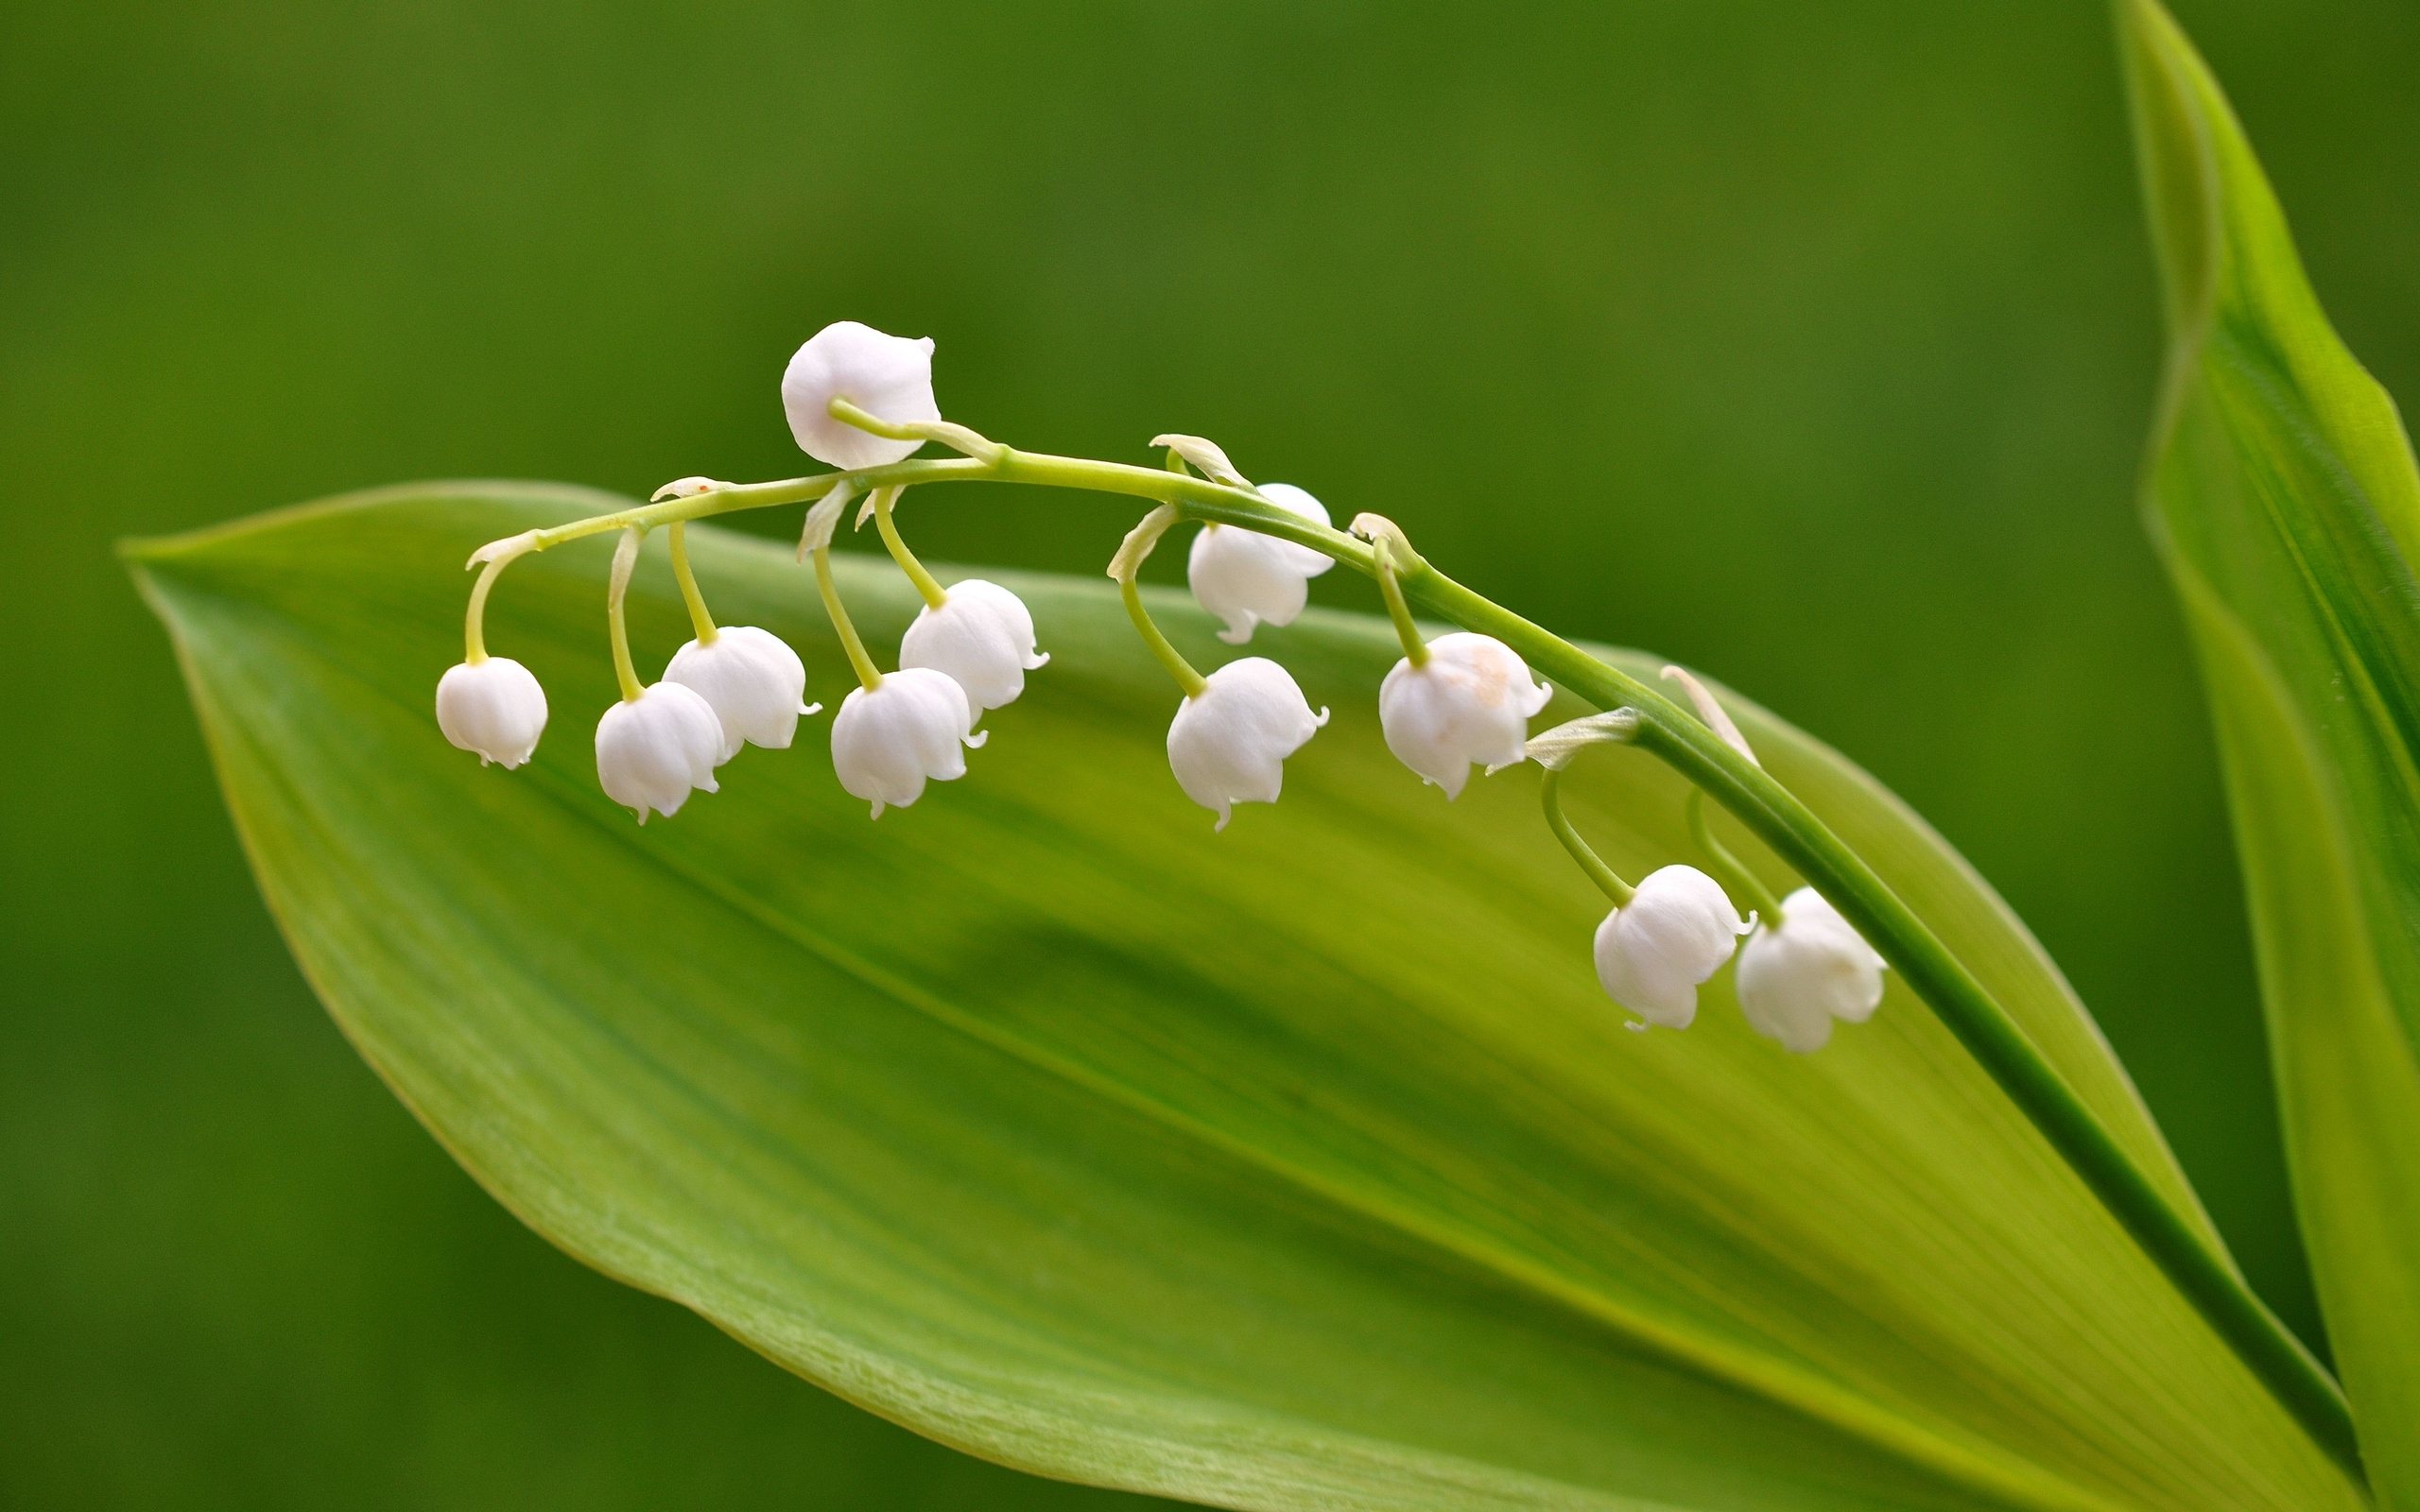 pixels), Lily of the valley, desk wallpaper